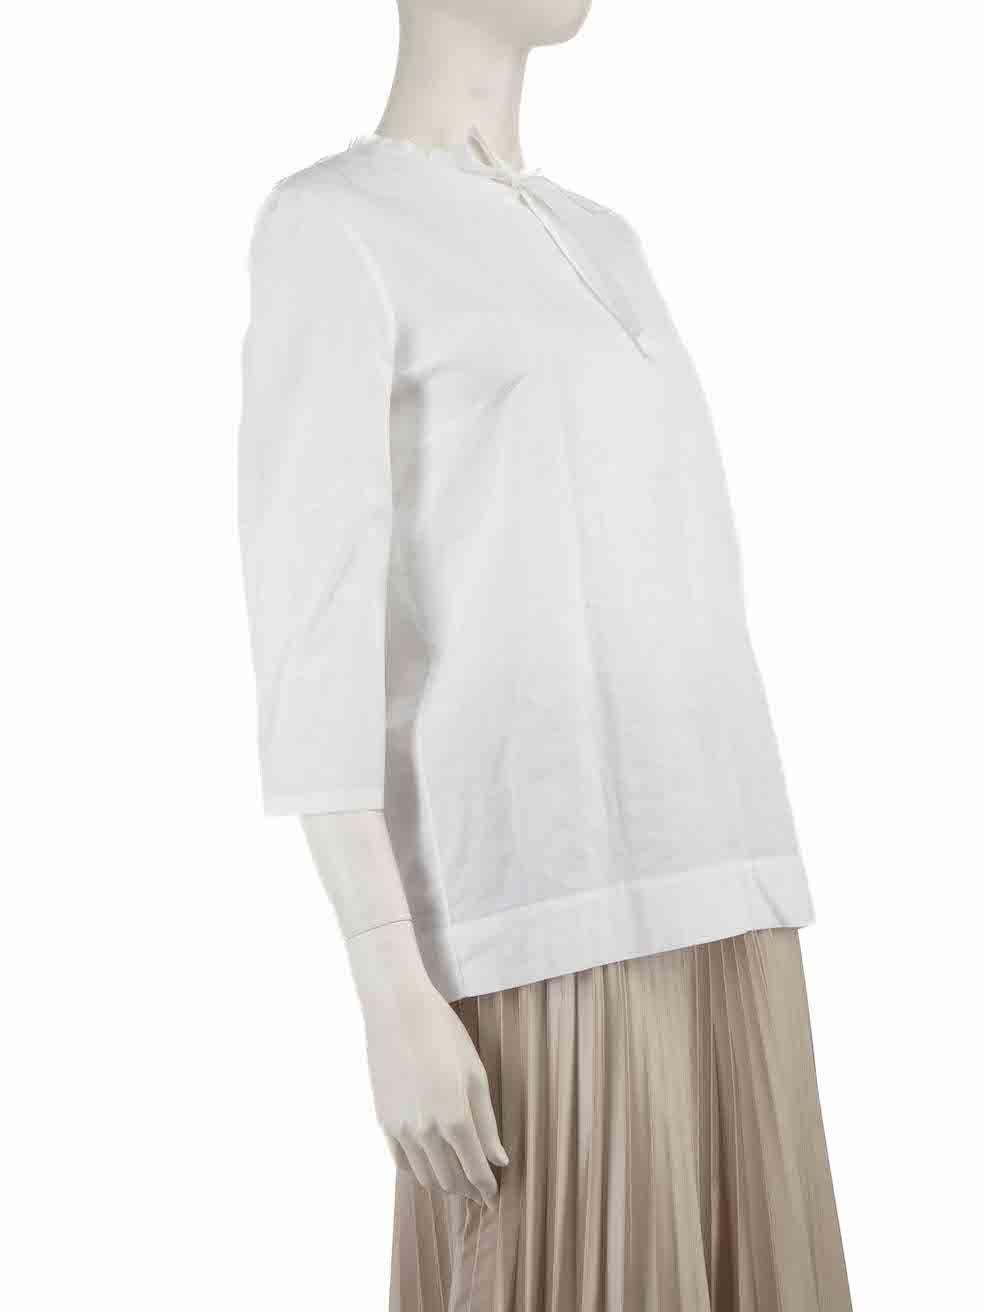 CONDITION is Very good. Minimal wear to shirt is evident. Minimal wear to left sleeve cuff and shoulder with discoloured marks on this used Marni designer resale item.
 
 Details
 S/S13
 White
 Cotton
 Blouse
 Long sleeves
 Neck tie detail
 Round